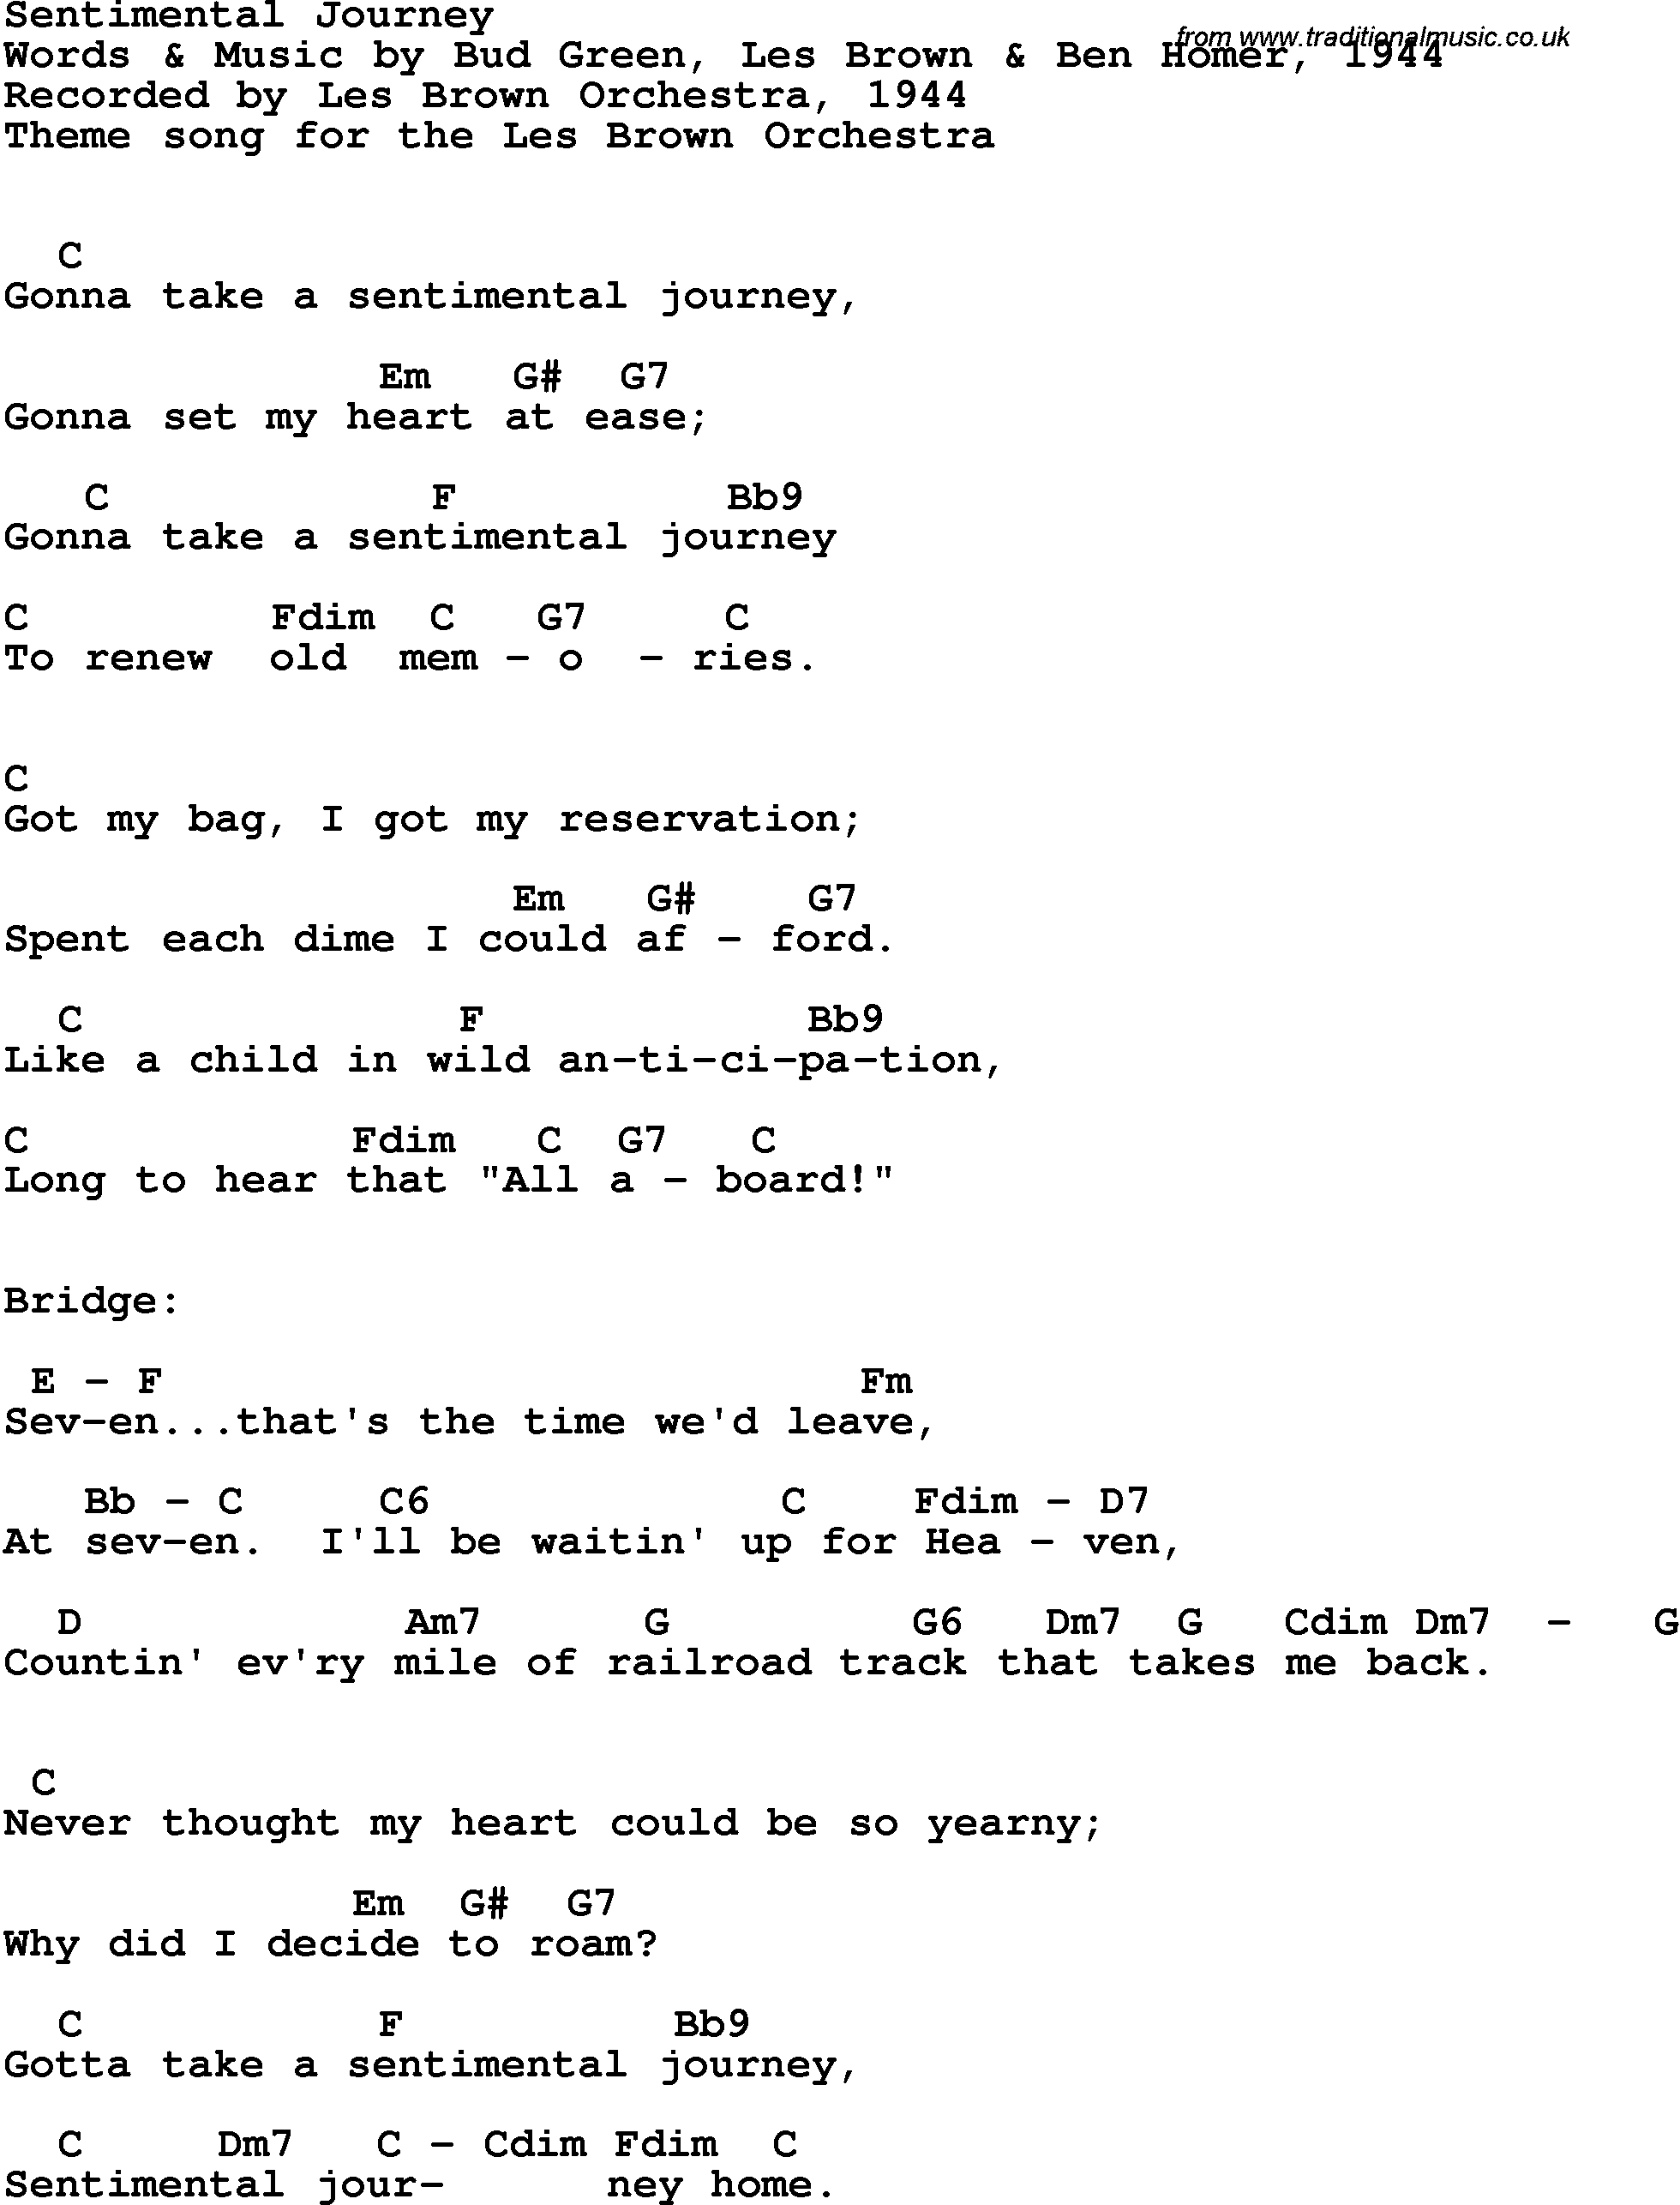 Song Lyrics with guitar chords for Sentimental Journey - Les Brown Orchestra, 1944